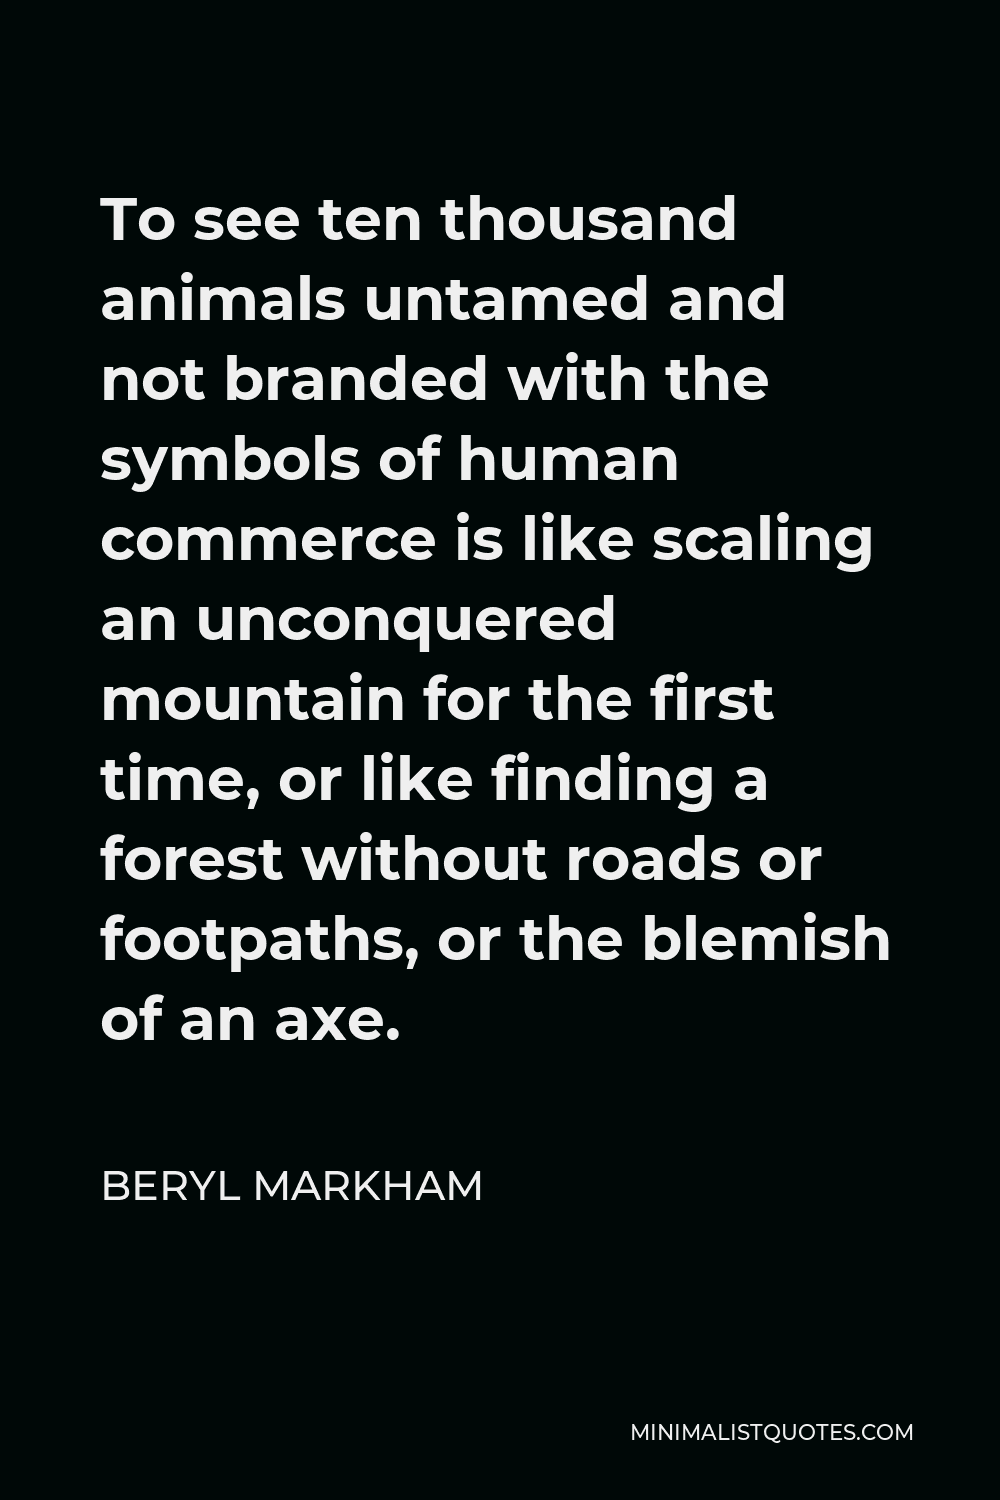 Beryl Markham Quote - To see ten thousand animals untamed and not branded with the symbols of human commerce is like scaling an unconquered mountain for the first time, or like finding a forest without roads or footpaths, or the blemish of an axe.